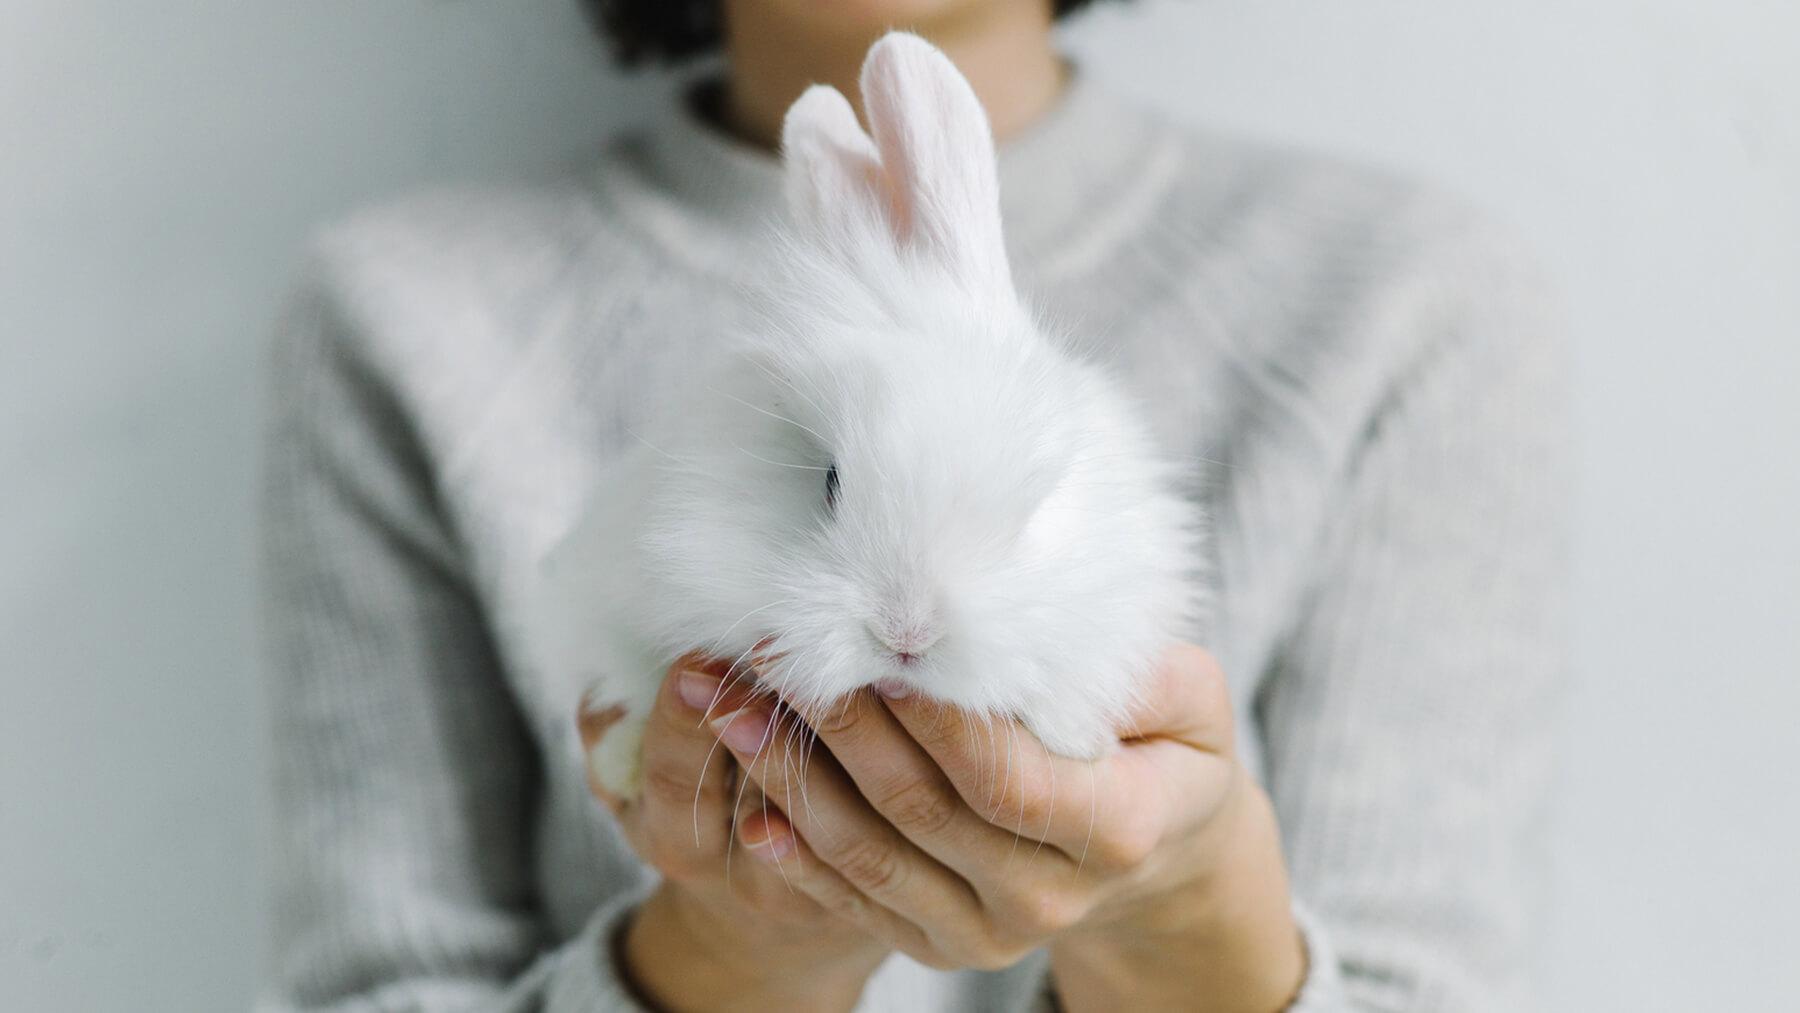 Cruelty-free cleaning is more than just a fad | Infuse by Casabella Blog